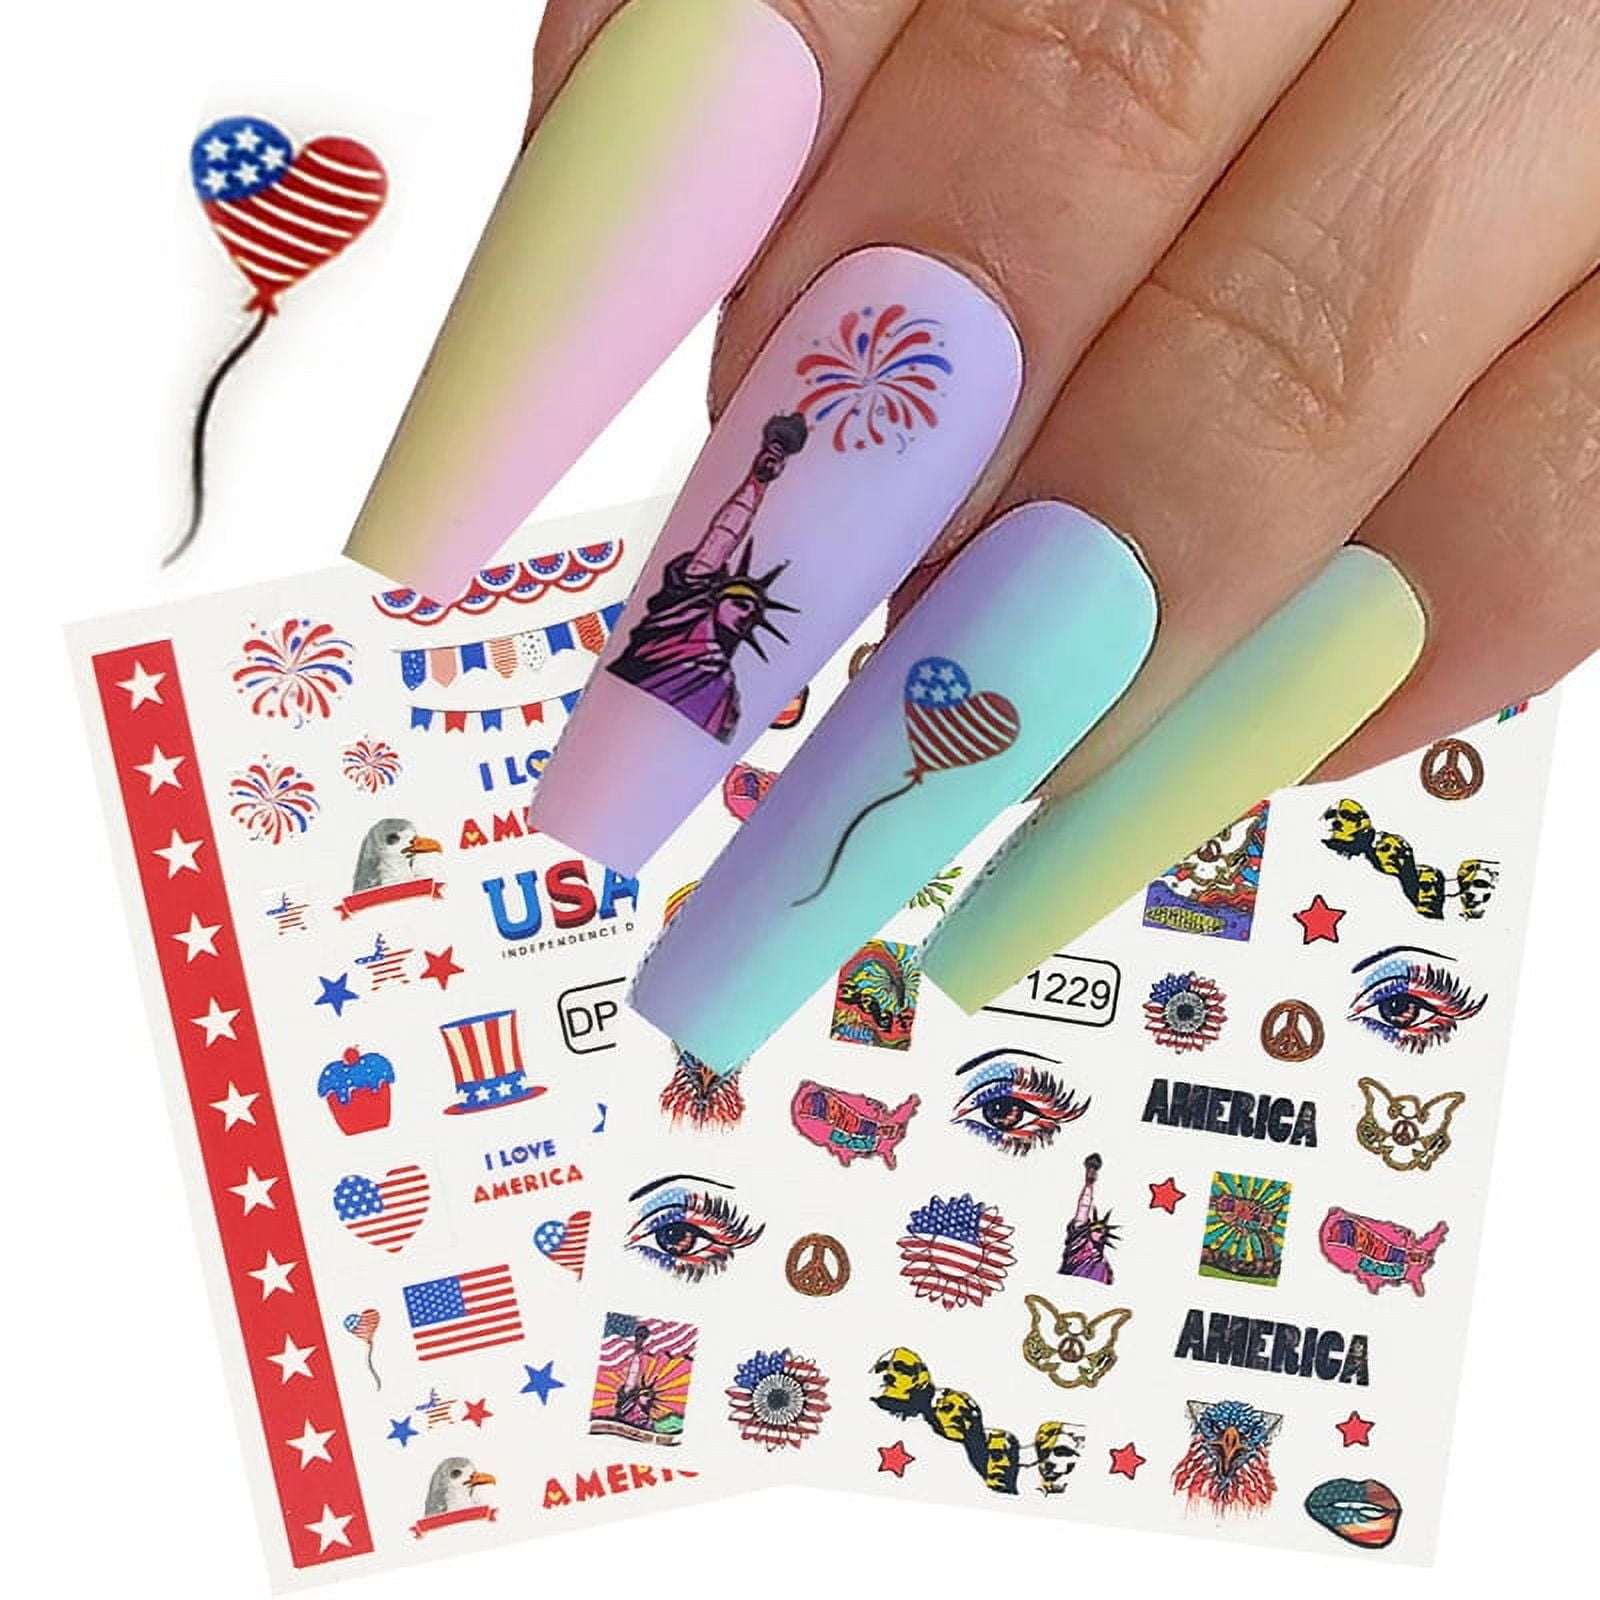 Everyday Wholesome | 55 Ideas for 4th of July & Patriotic Nails